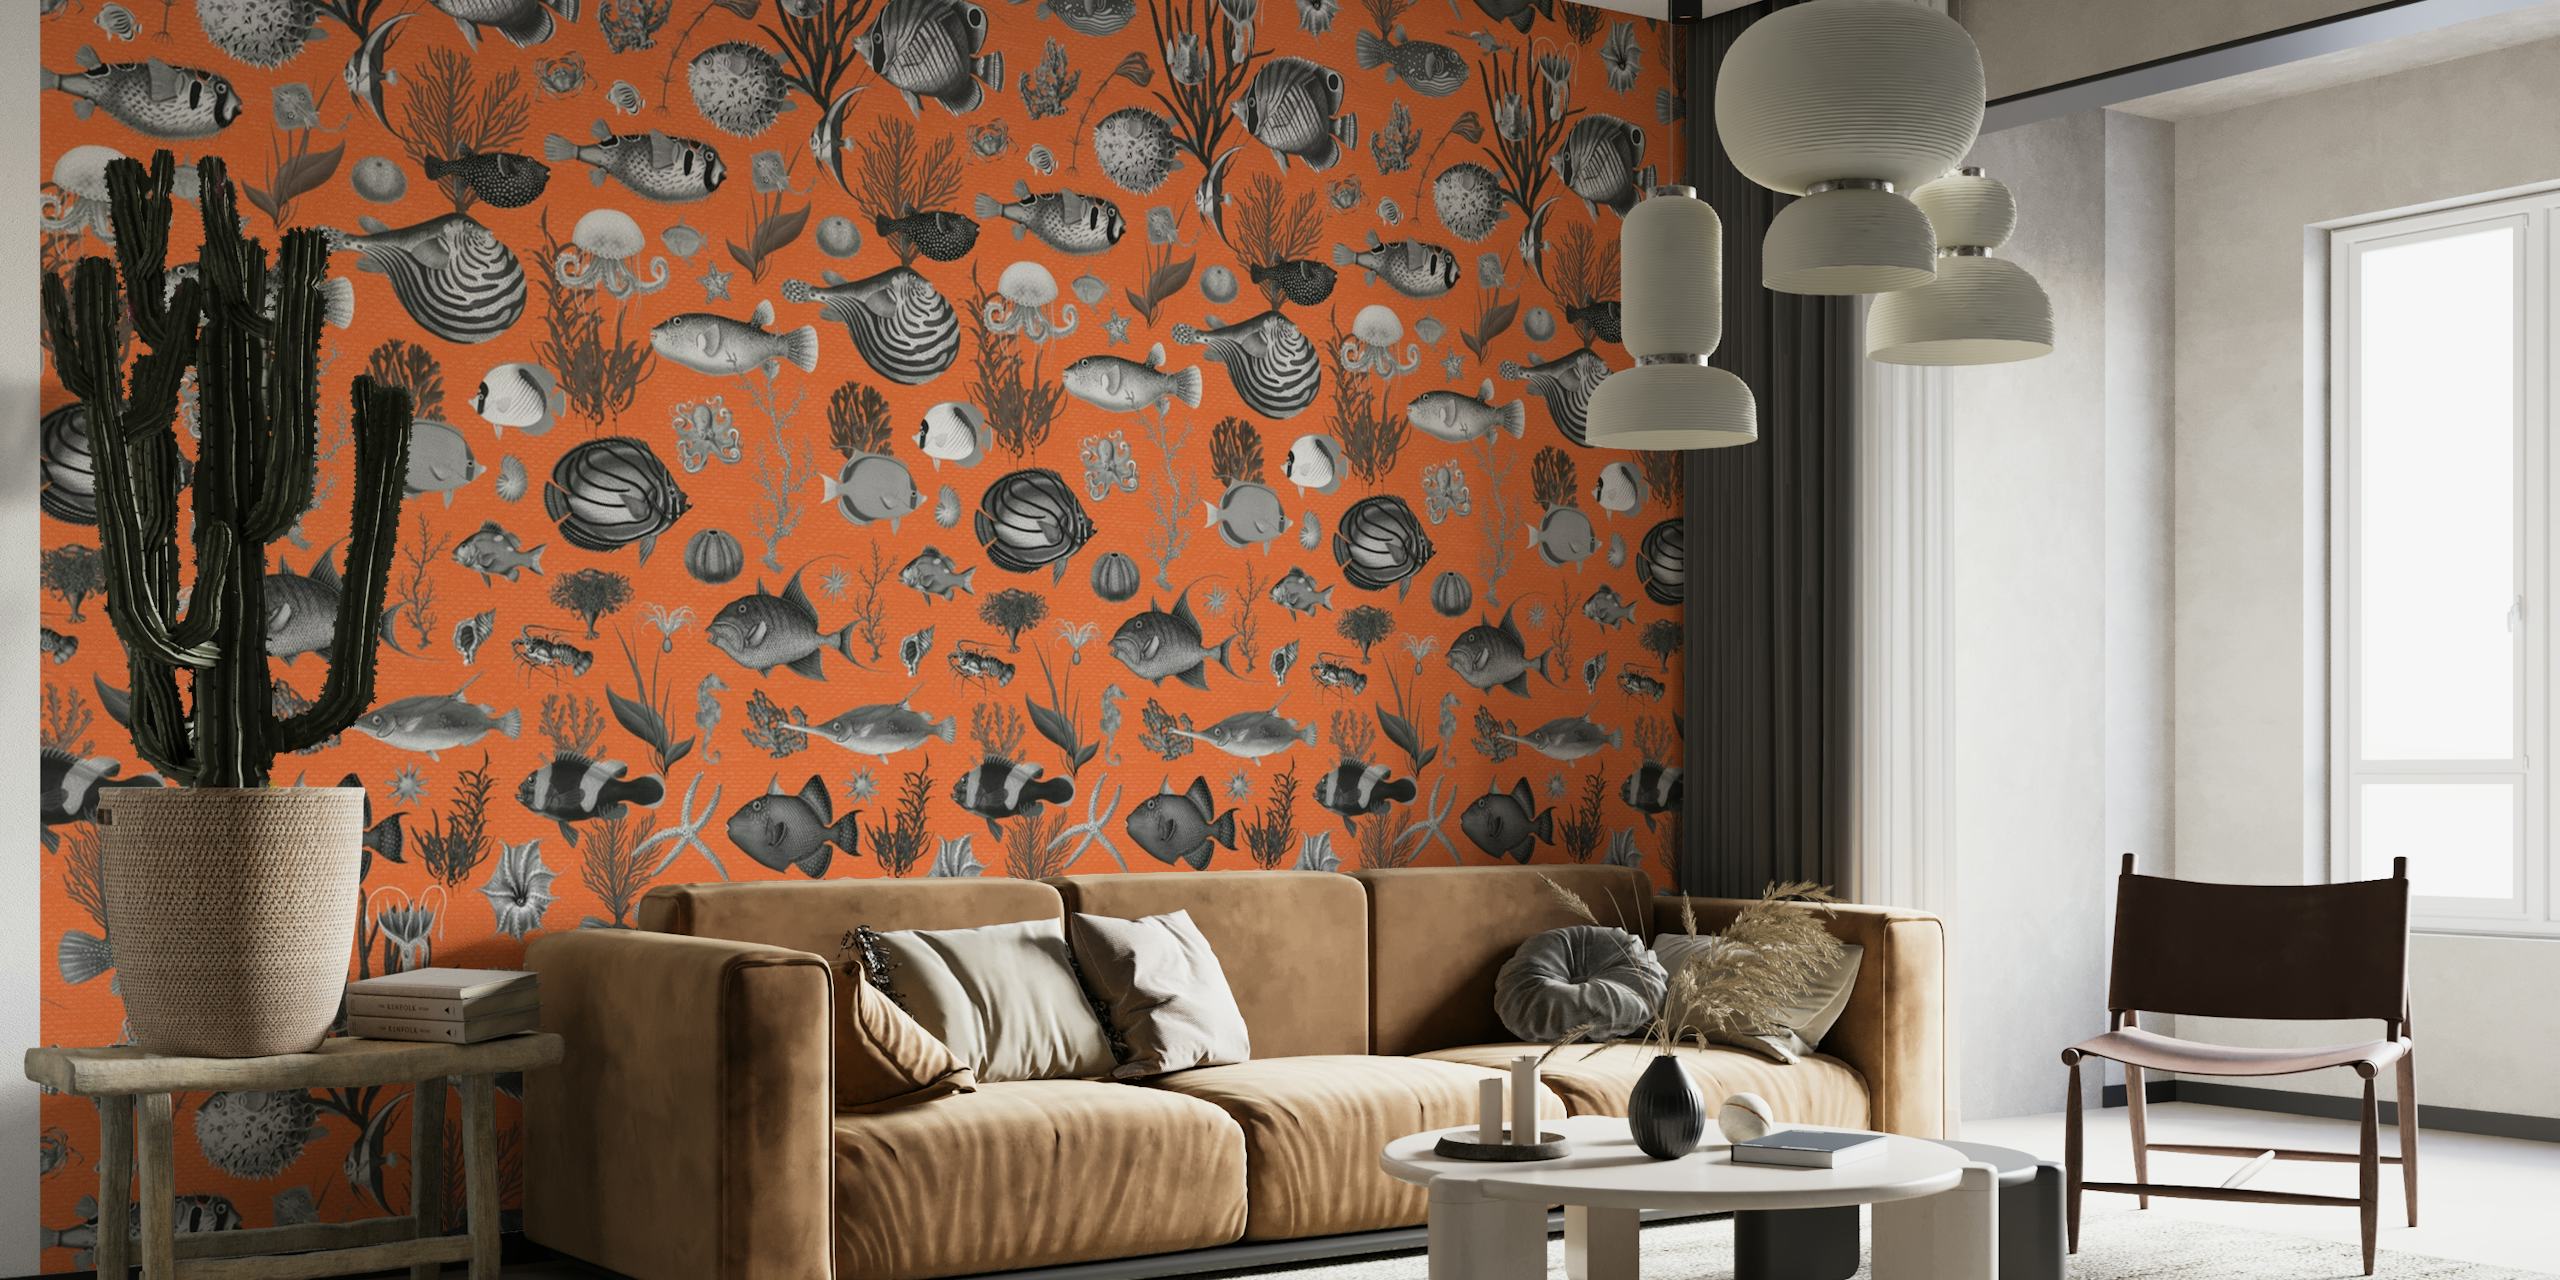 Abstract ocean-inspired wall mural with grey and orange marine patterns